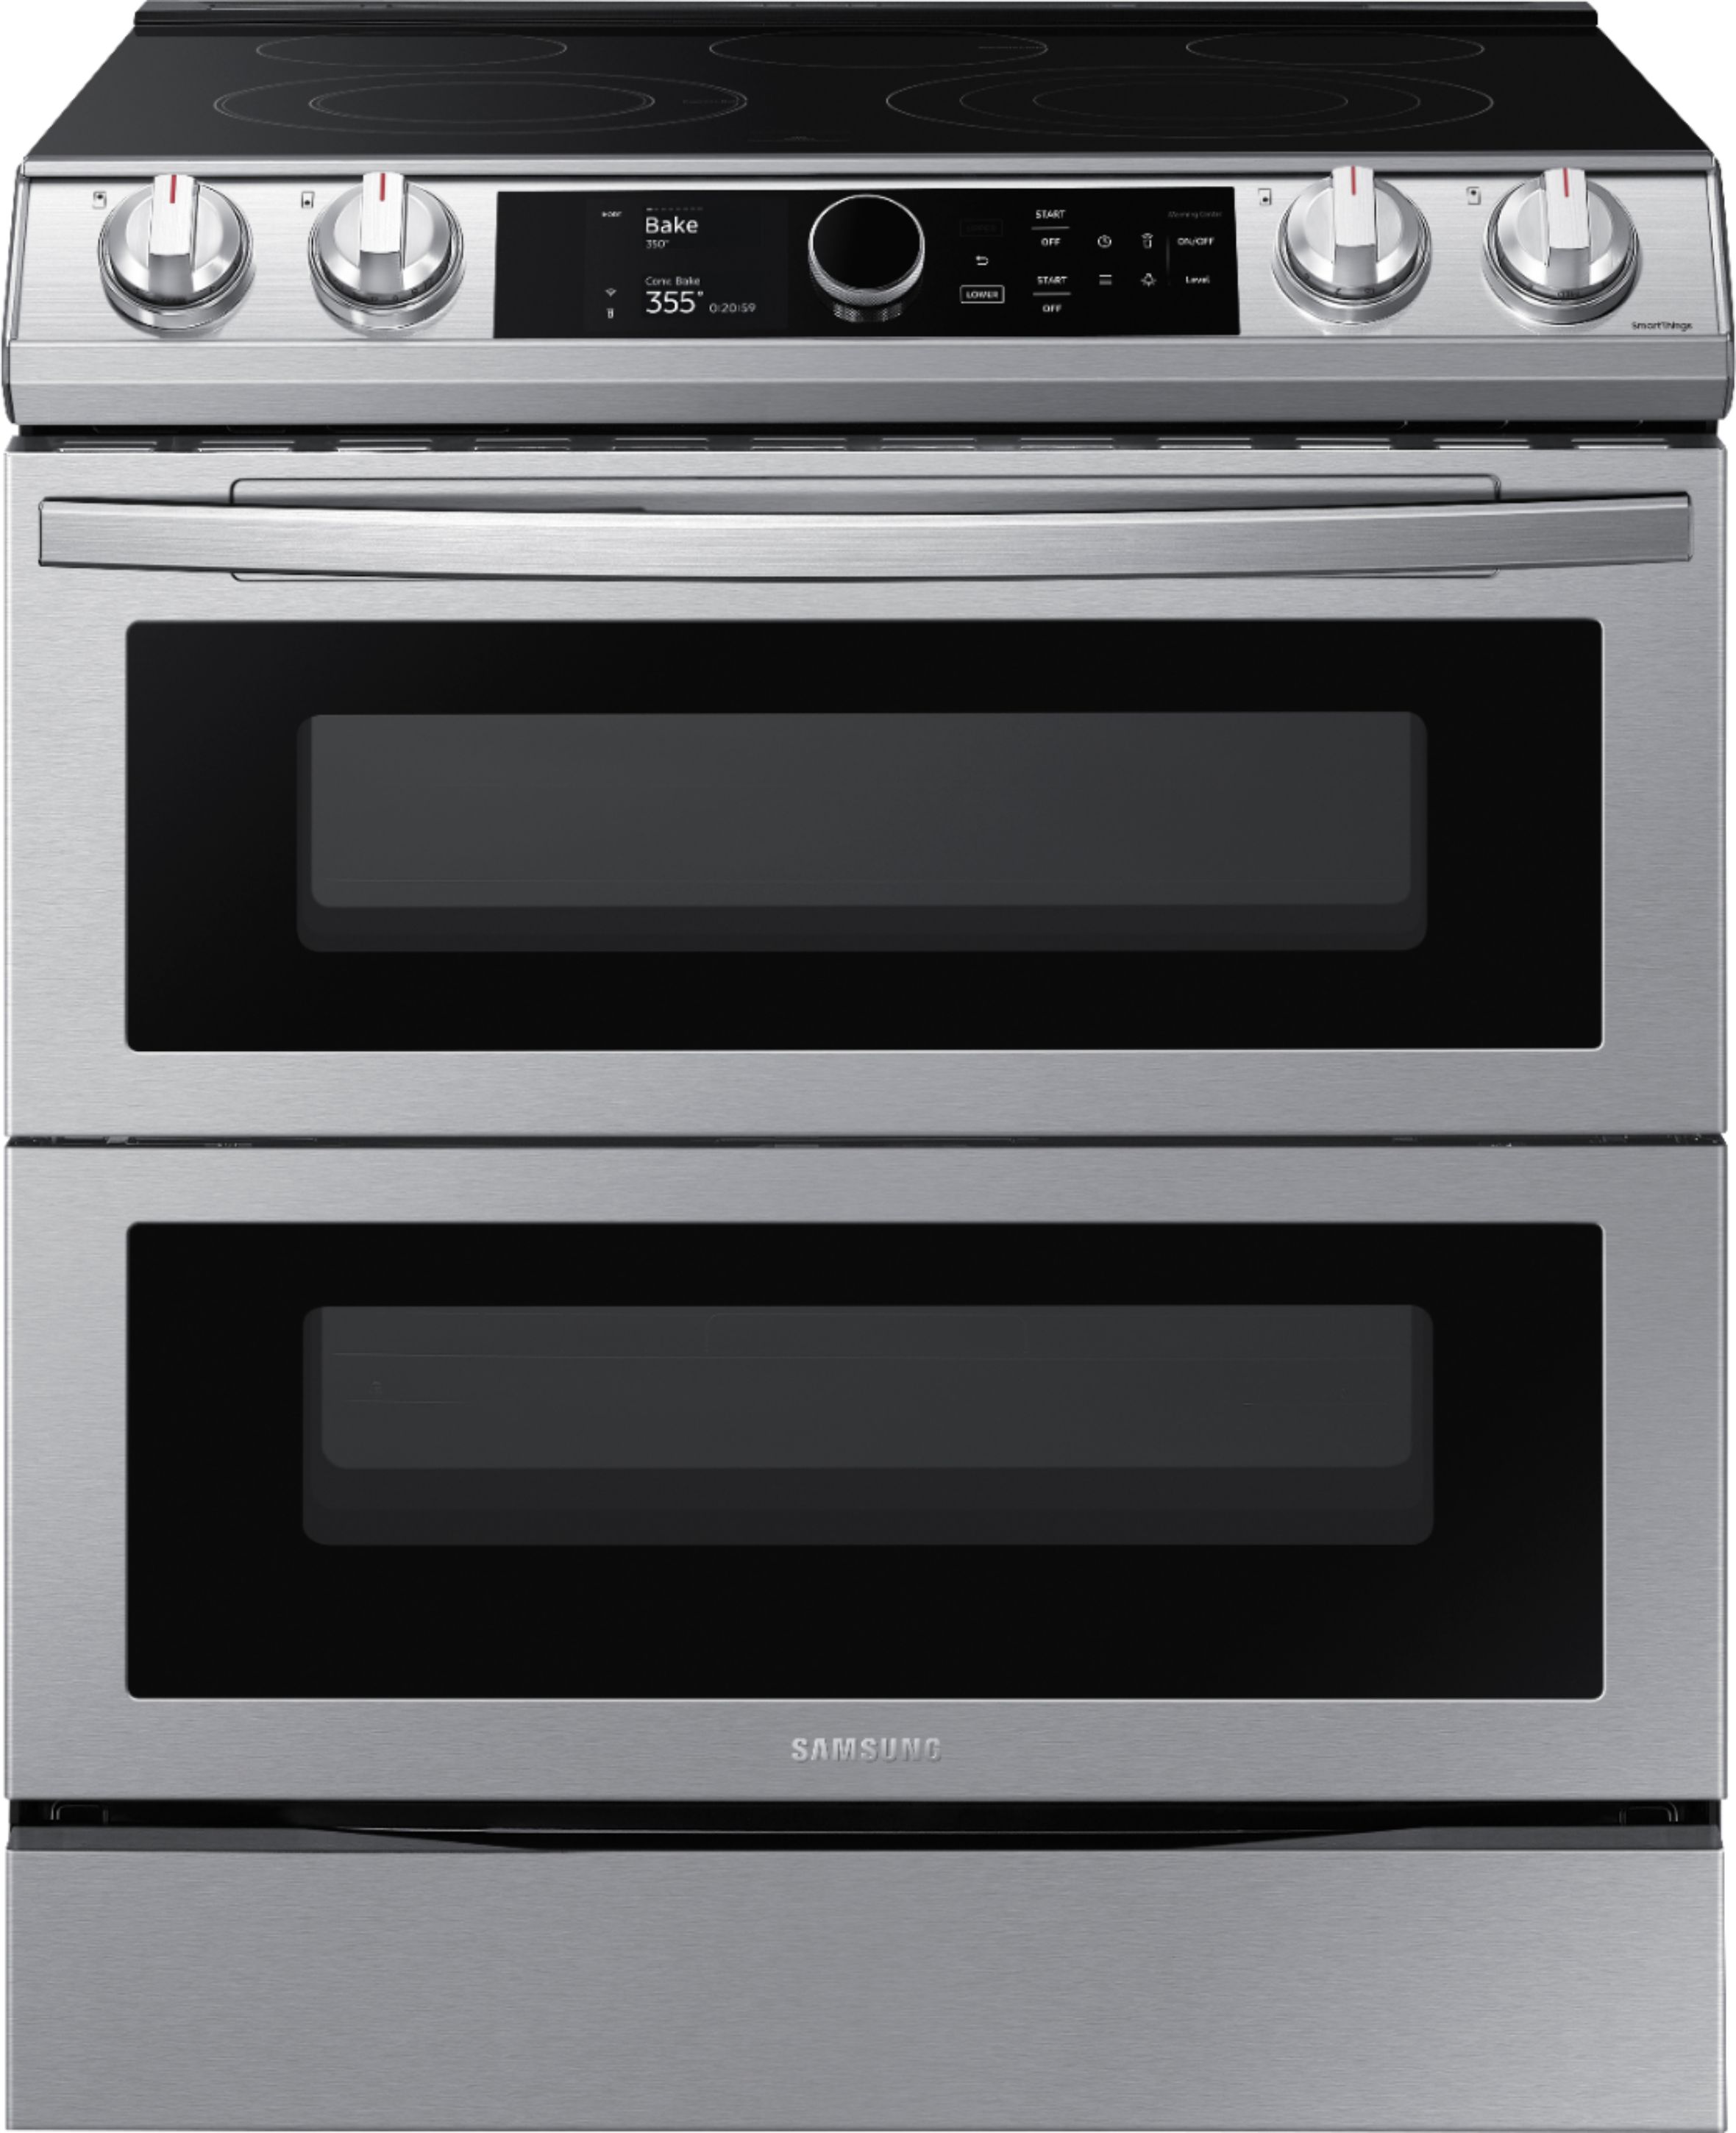 Samsung NY63T8751SG 30 Inch Slide-in Dual Fuel Smart Range with 5 Sealed  Burners, 6.3 Cu. Ft. Oven Capacity, Air Fry, Steam + Self Clean, Flex Duo™,  Smart Dial, Wi-Fi, Voice Control, Sabbath